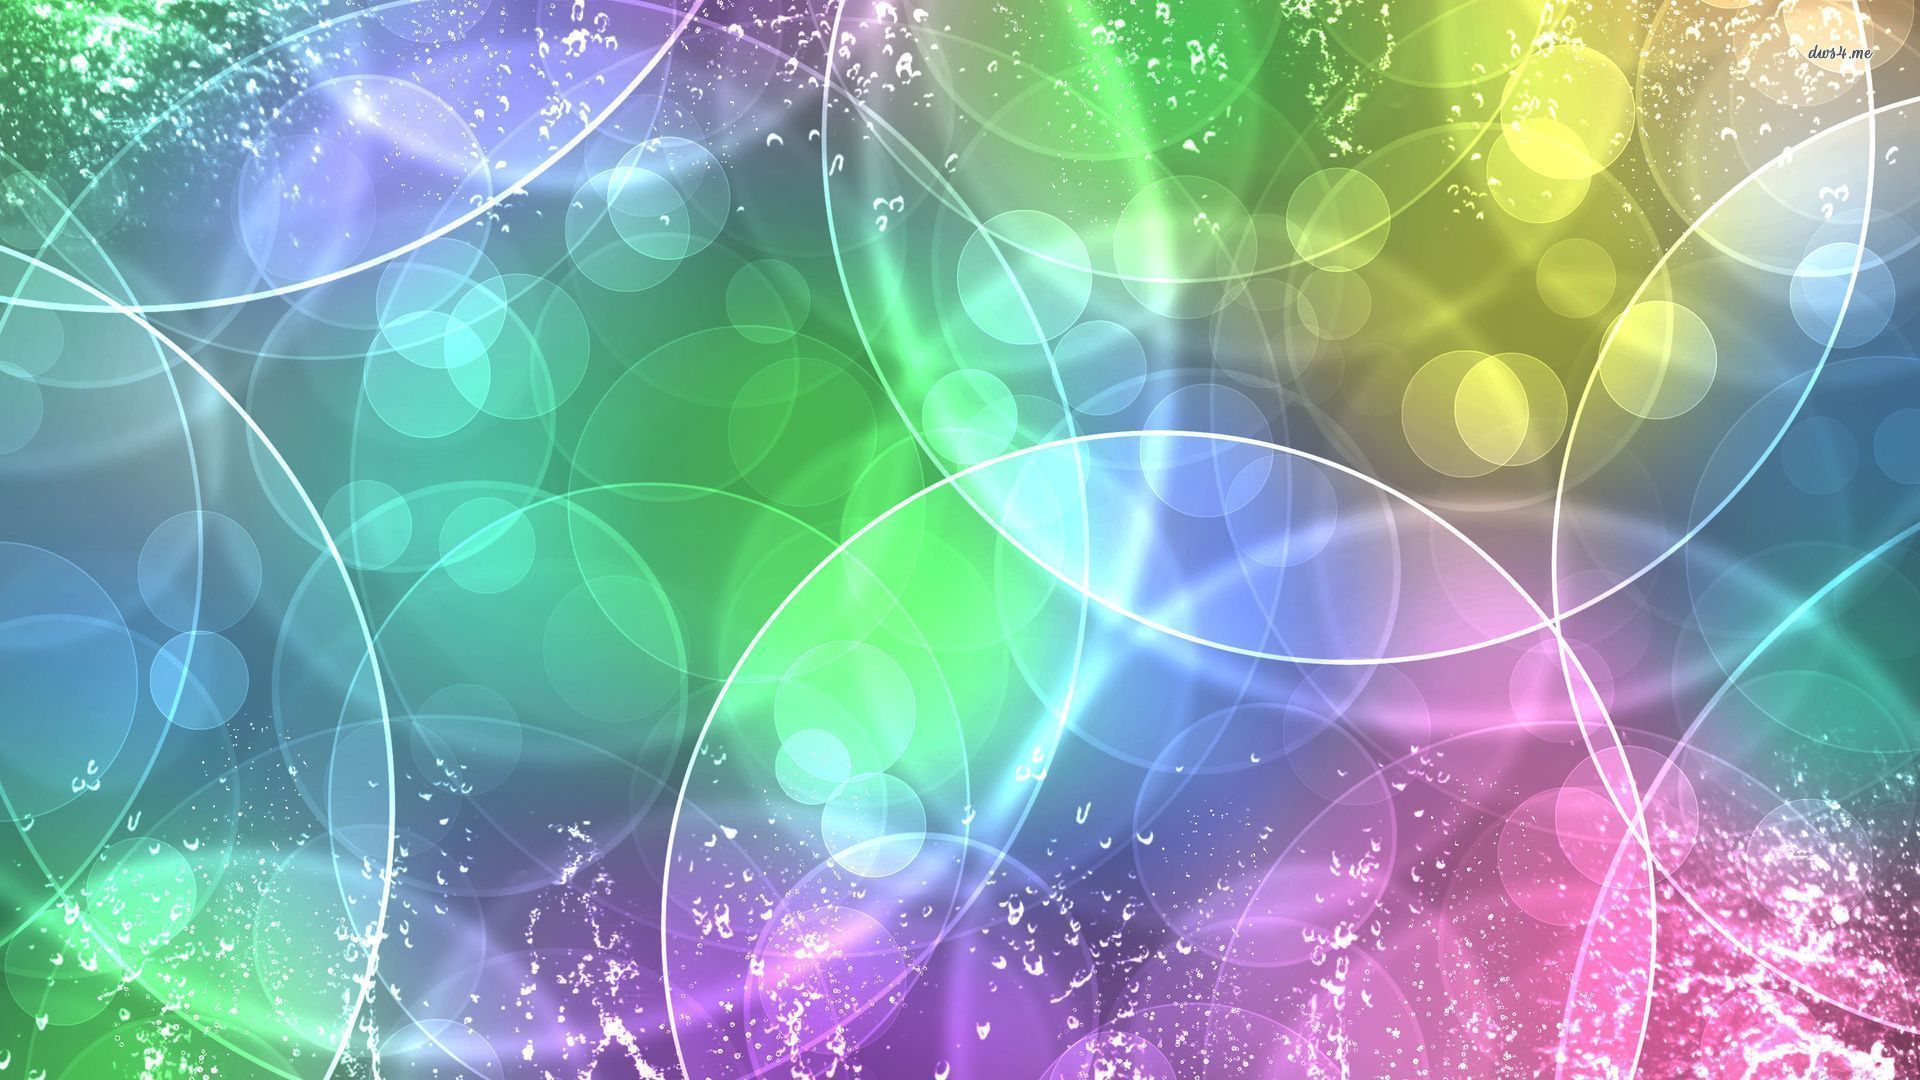 Colorful translucent bubbles wallpaper - Abstract wallpapers -